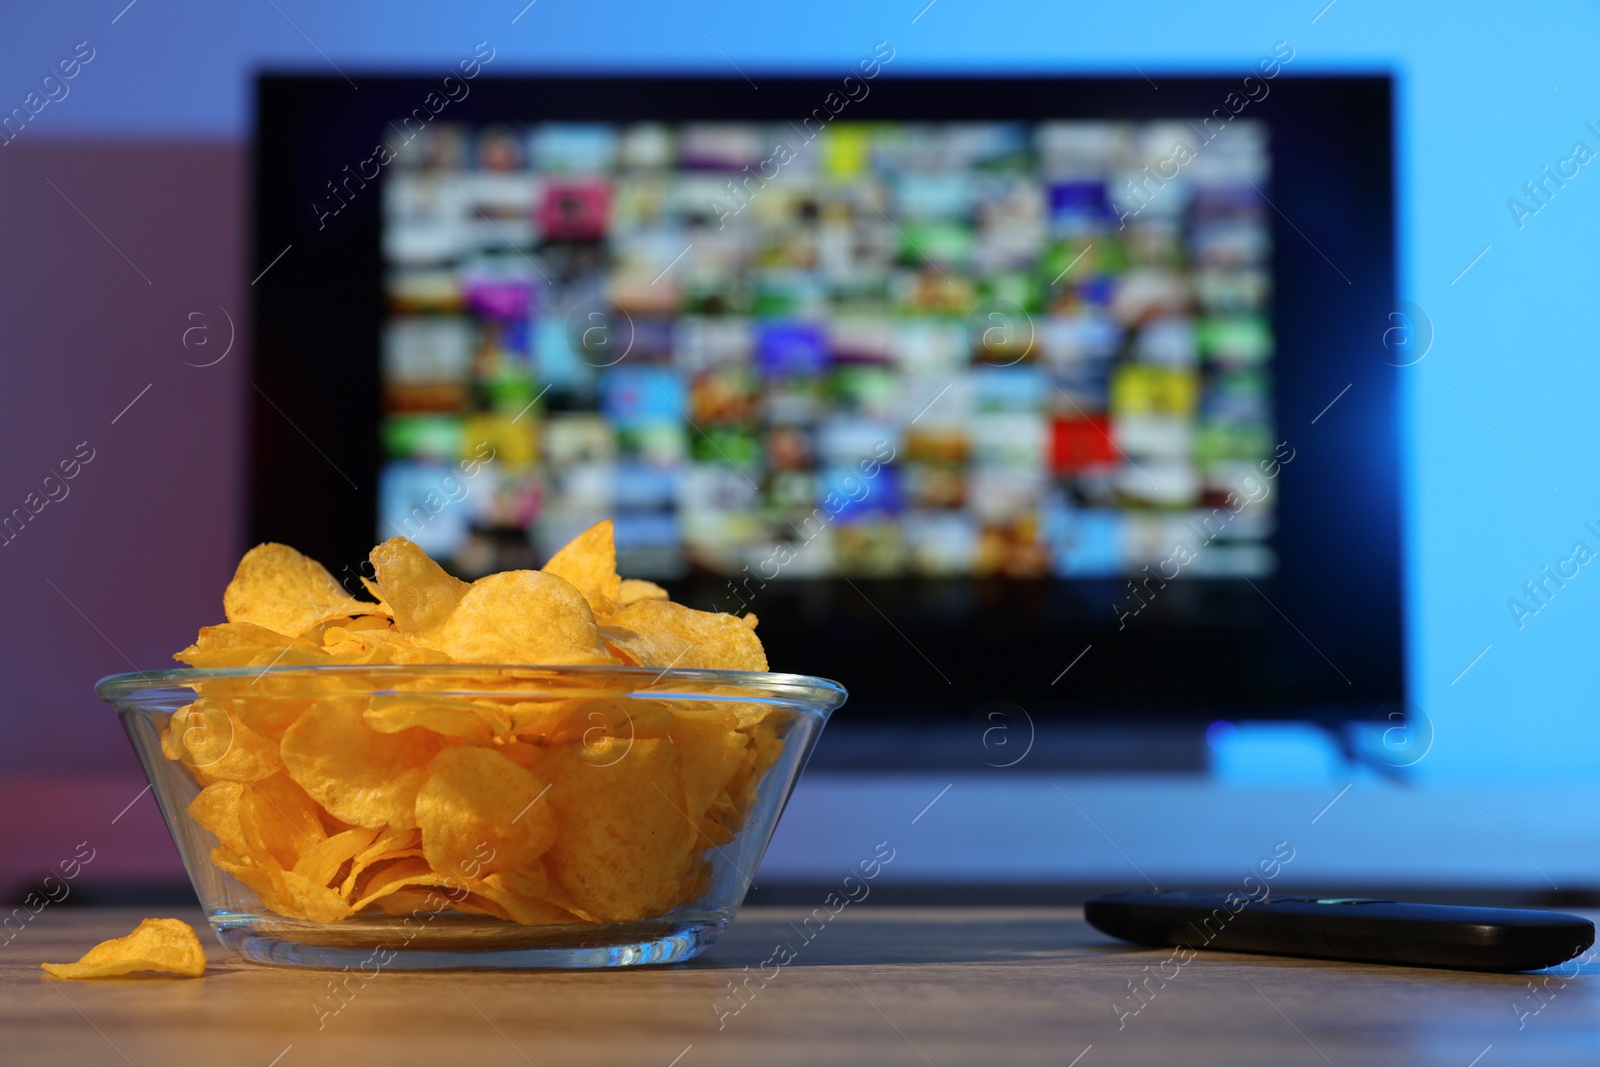 Photo of Bowl of chips and TV remote control on table indoors